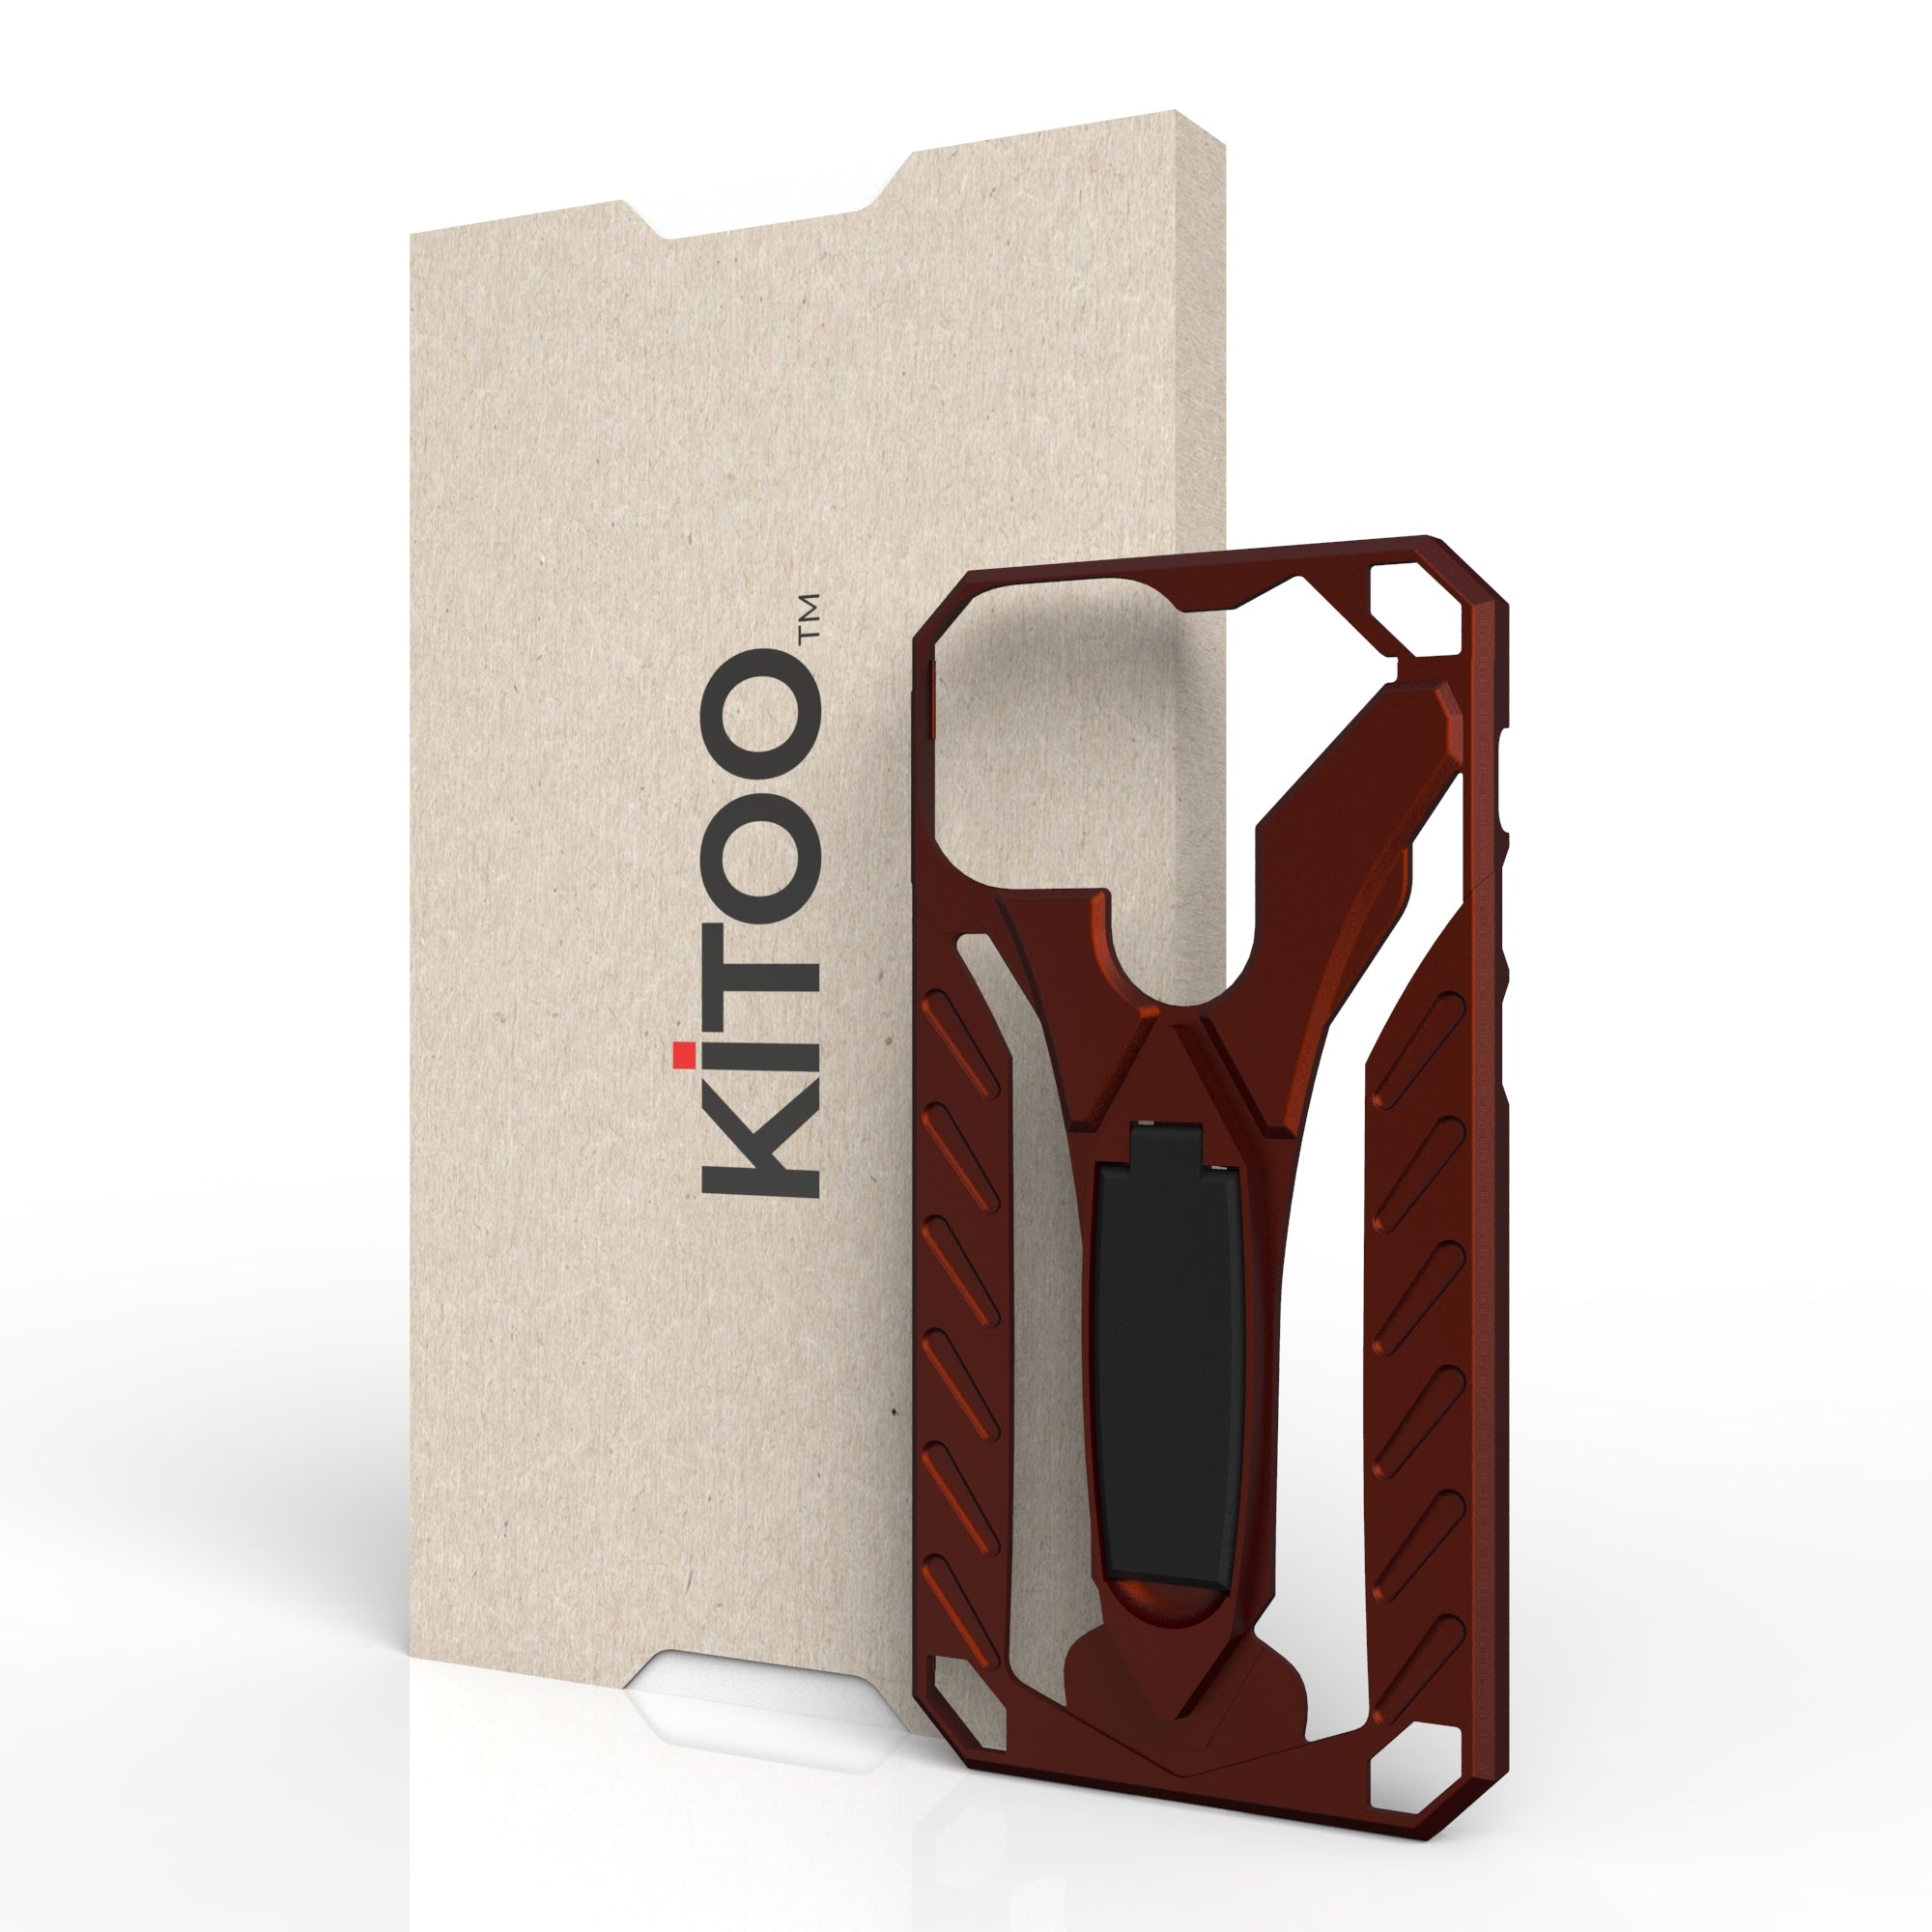 Kitoo Kickstand Panel Designed for iPhone 13 Mini case (Spare Part only) - Red